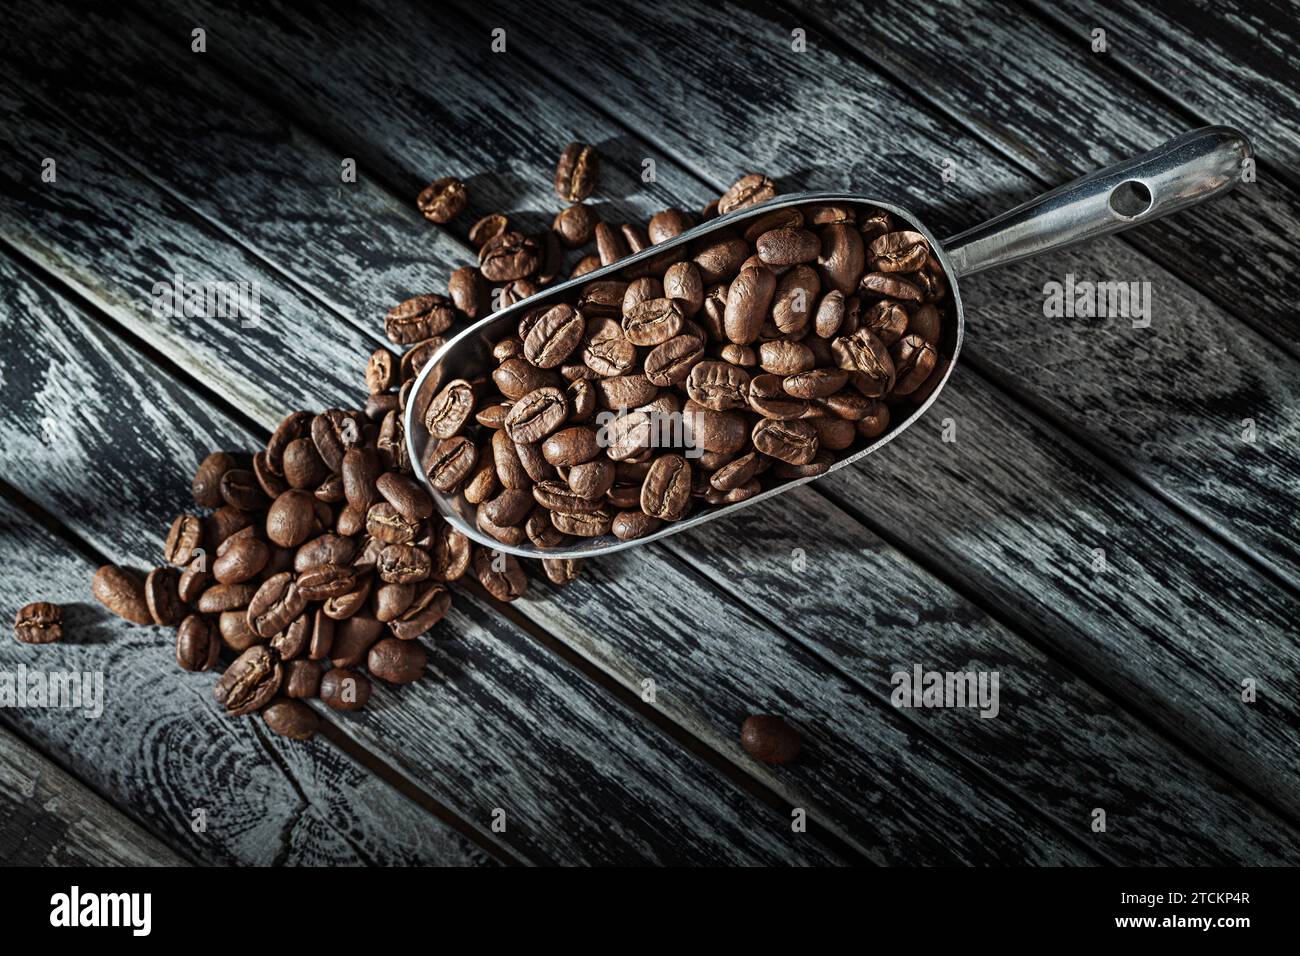 Roasted Coffee Beans And Scoop On Vintage Backgorund Stock Photo